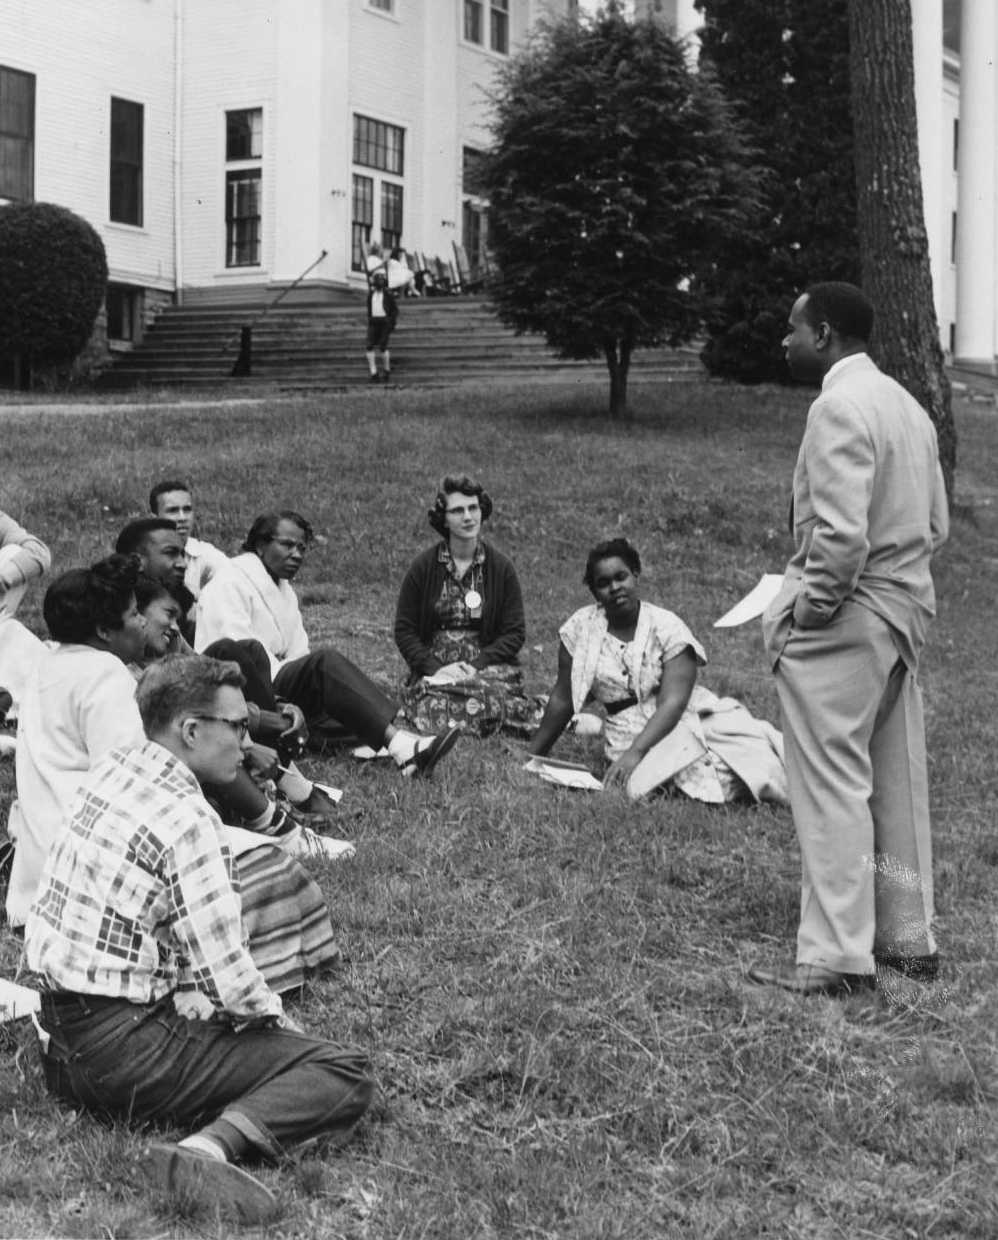 This photograph is of L. Maynard Catchings meeting with a group of students affiliated with the YMCA and YWCA. The original image can be found here: http://purl.umn.edu/77727.